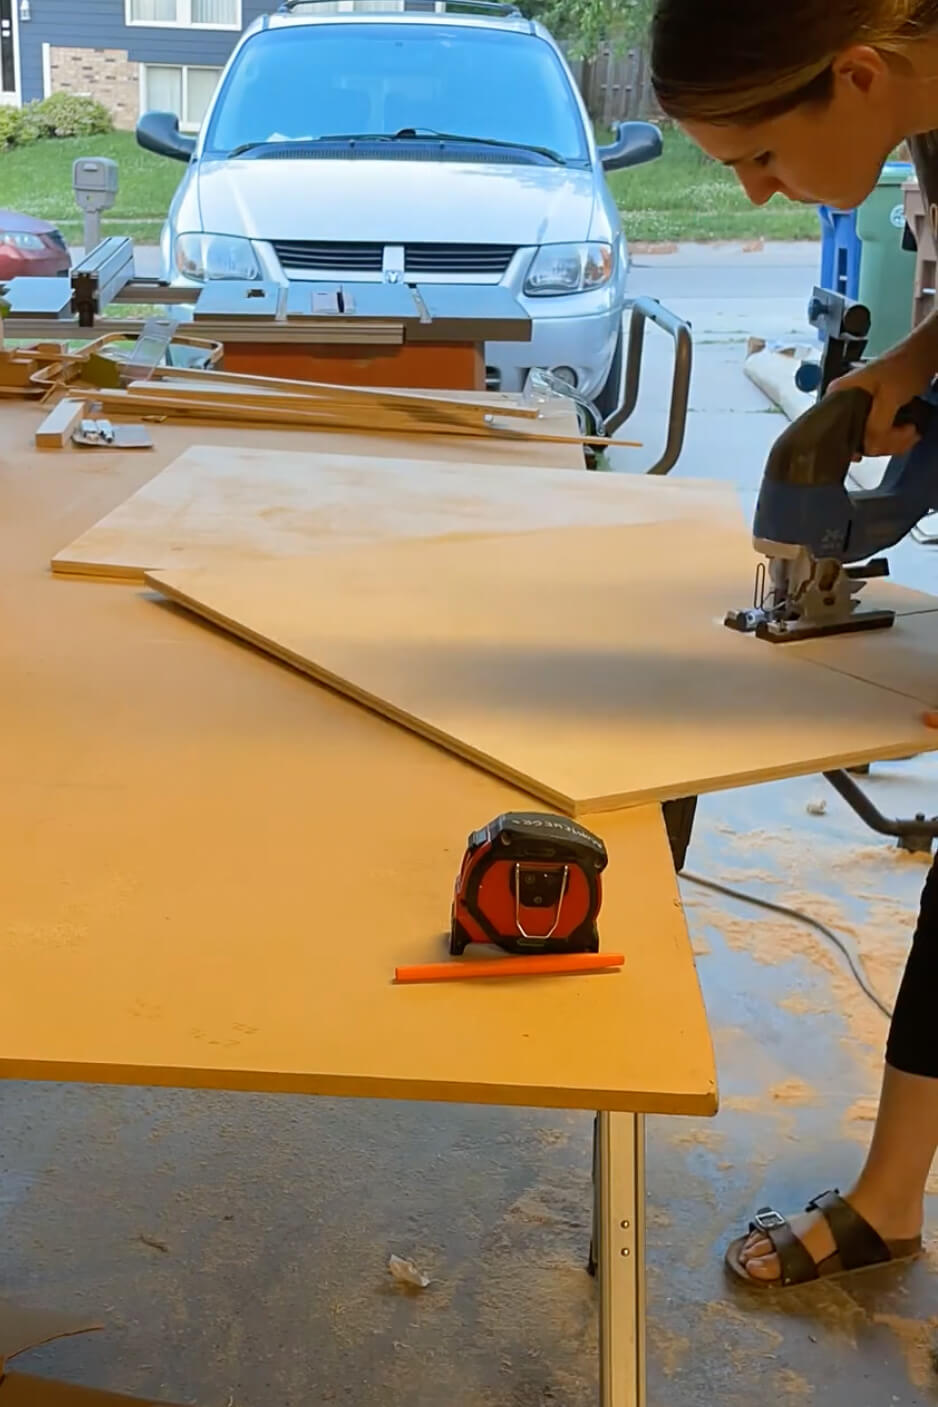 Woman using a jig saw to build DIY kitchen cabinets.